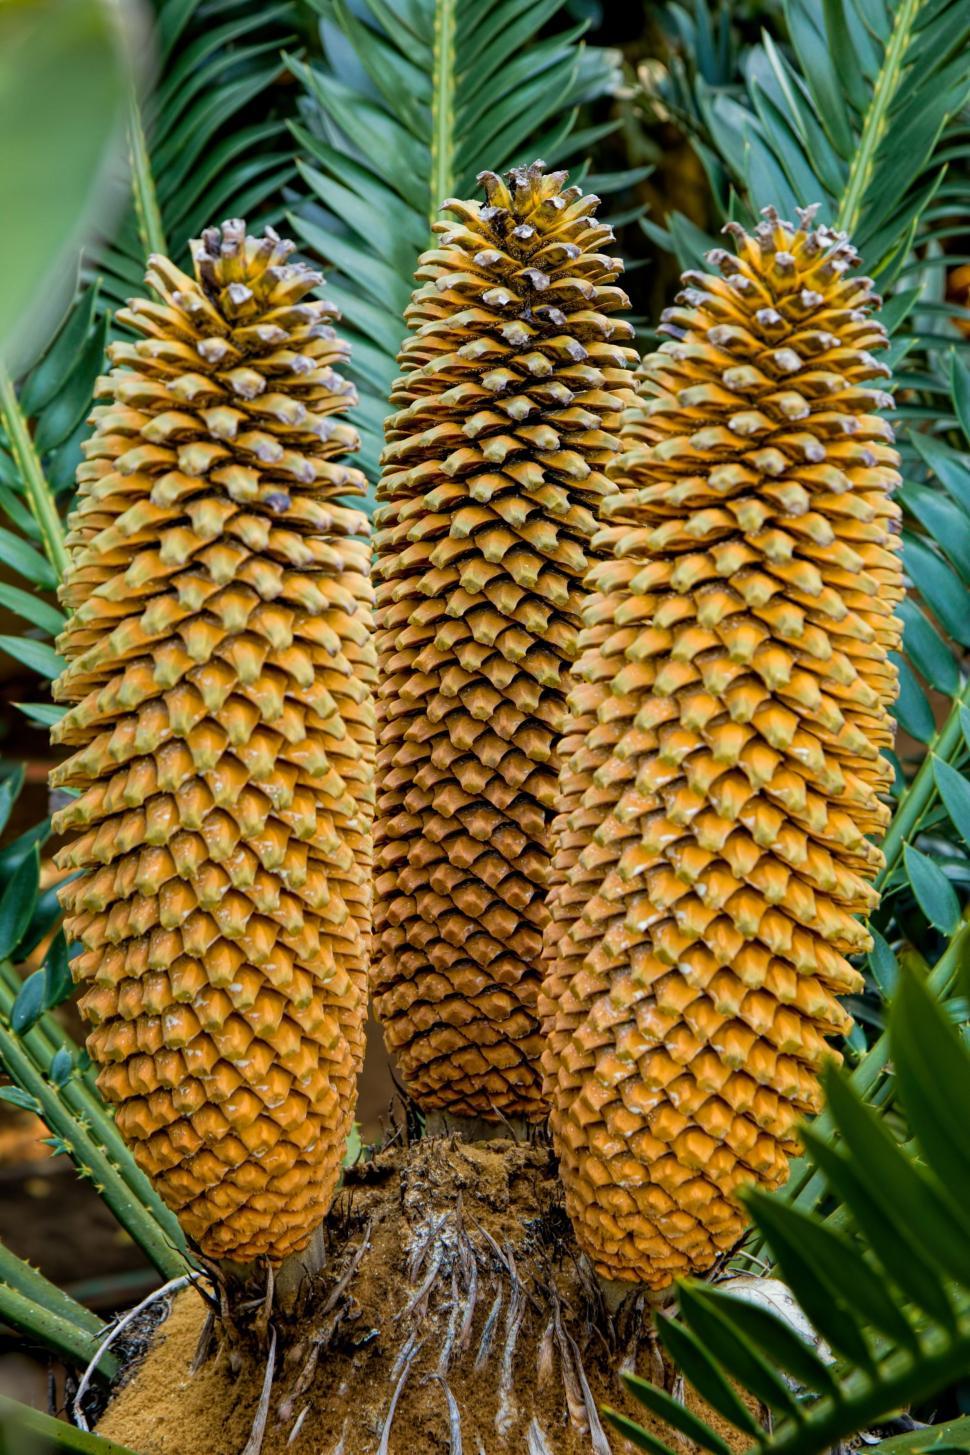 Free Image of Close-Up of Pine Cones on Tree 